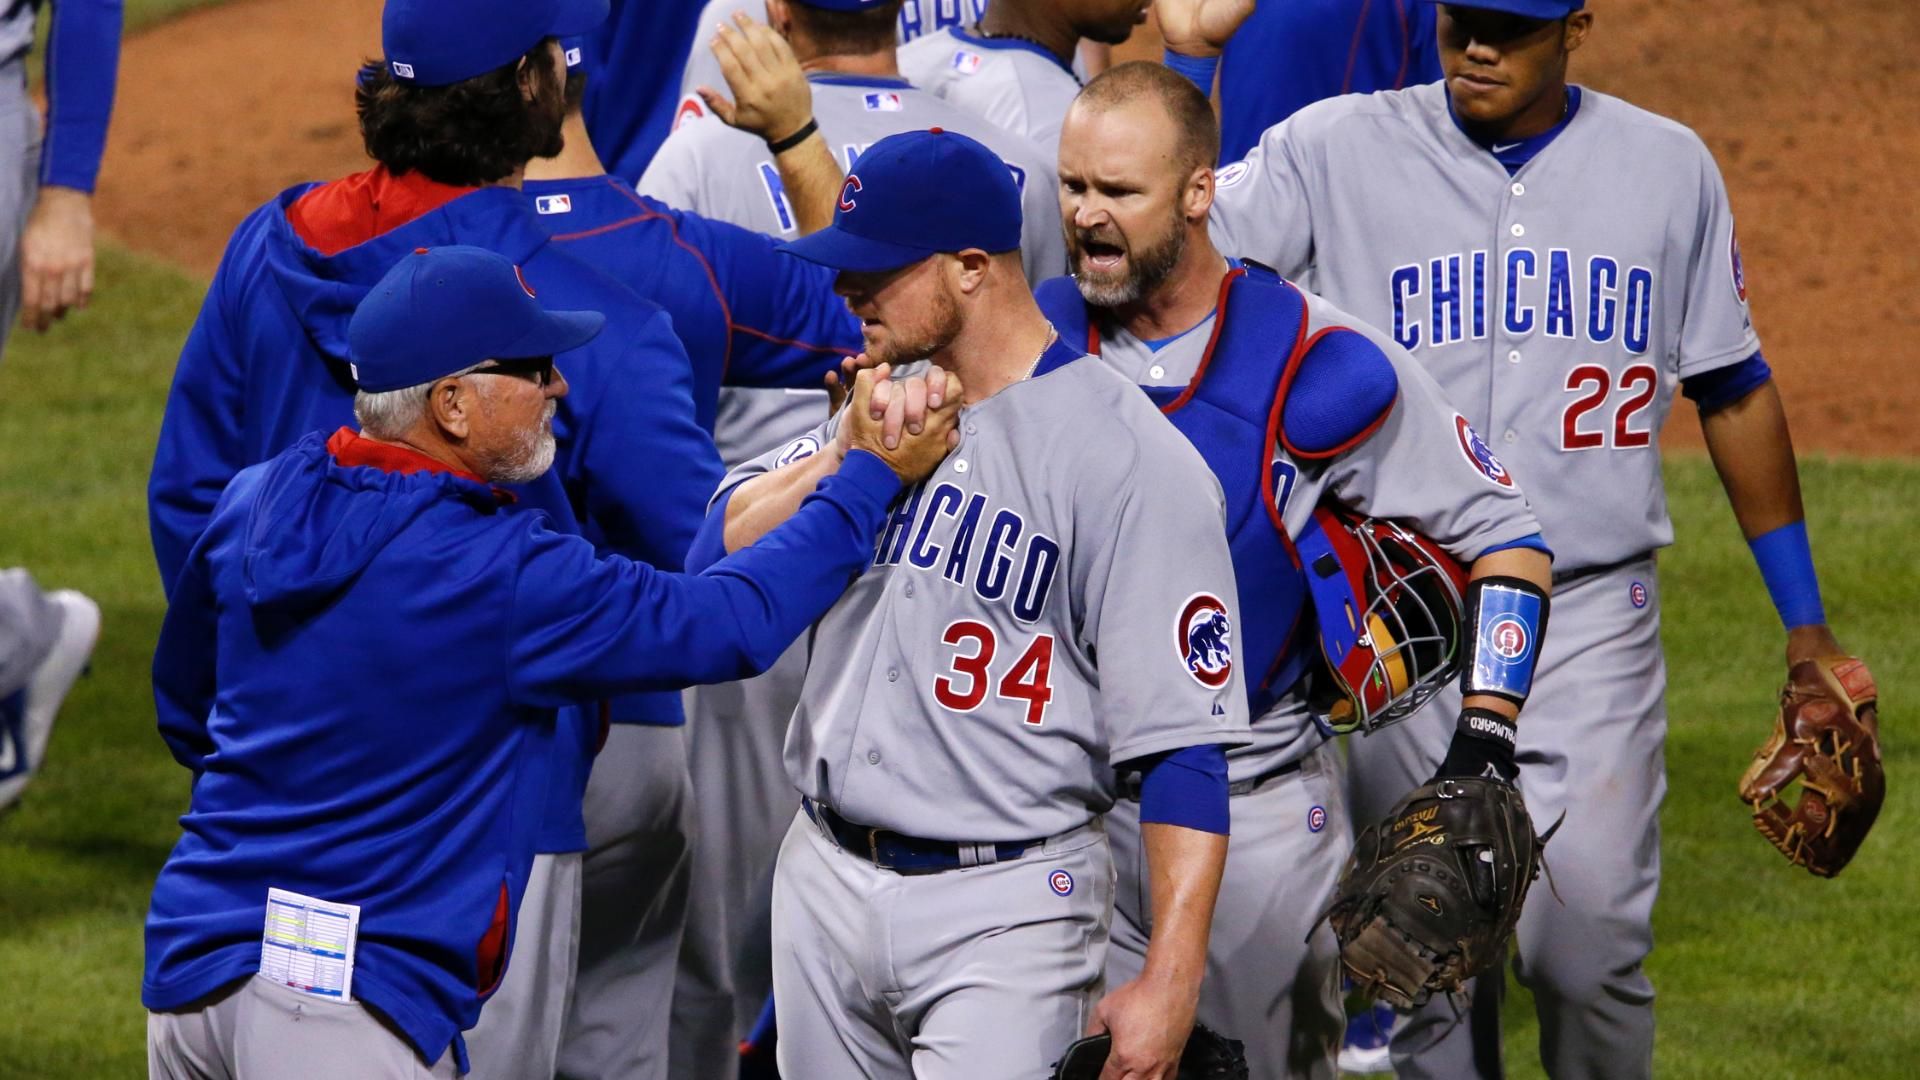 Cubs clinch first playoff spot since '08 with Giants' elimination